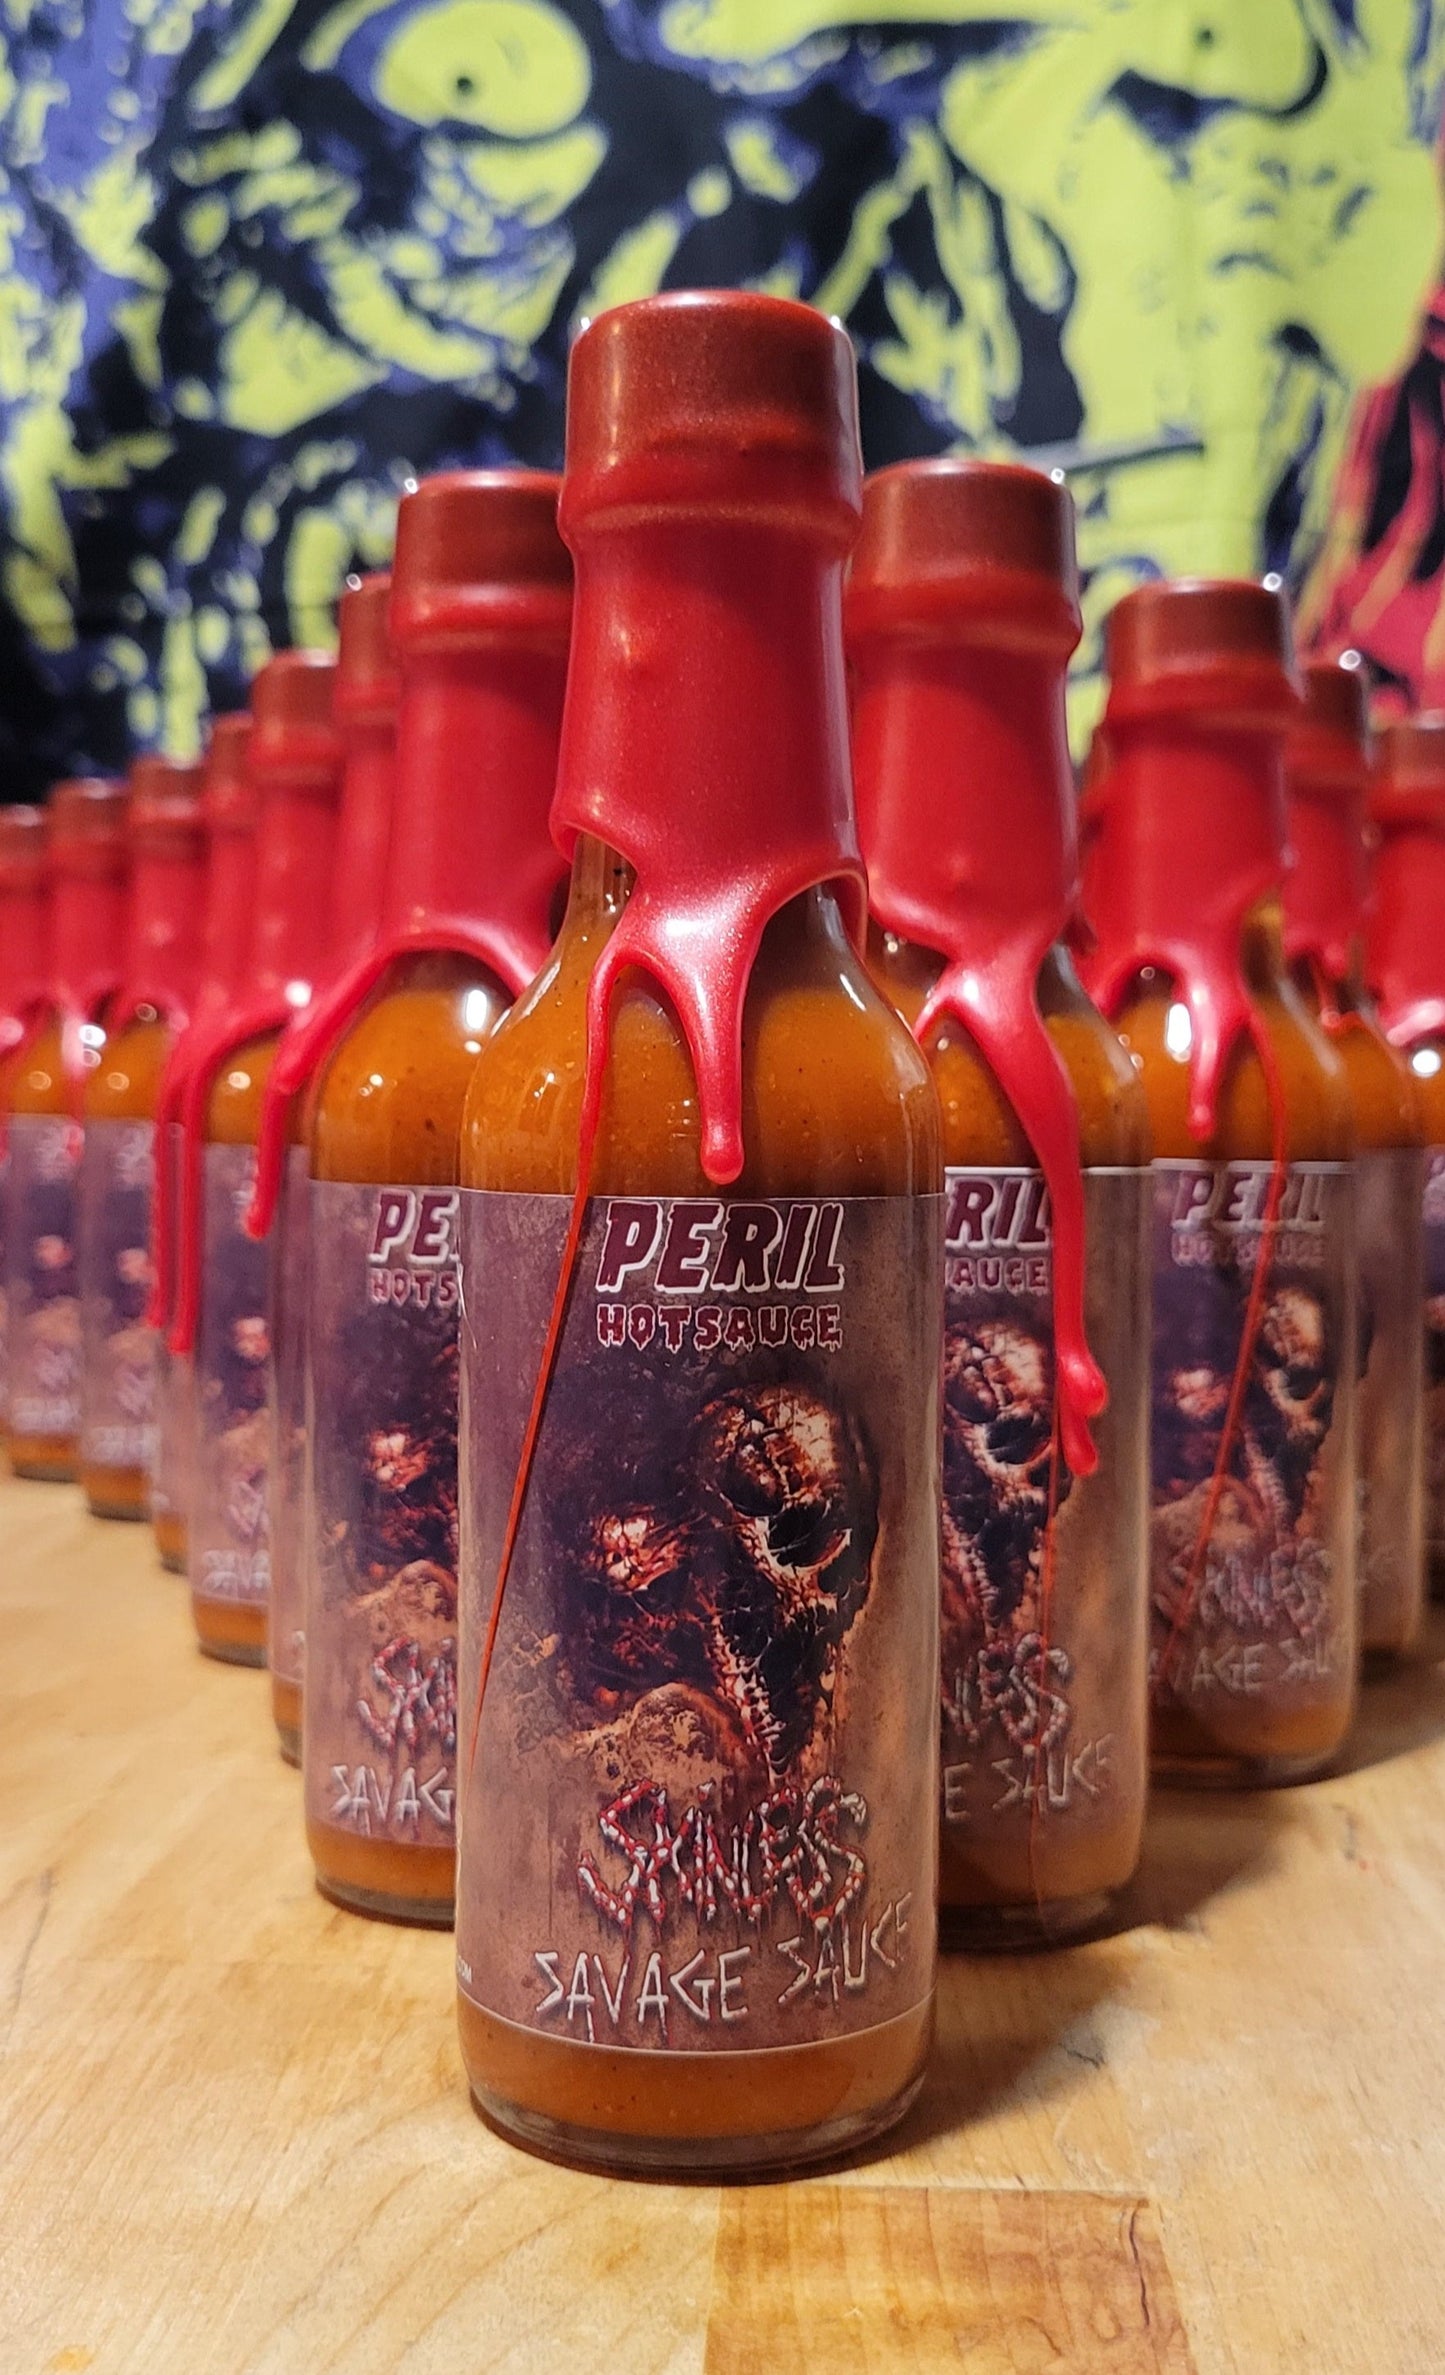 SKINLESS - Savage Sauce Special Edition wax dipped bottle